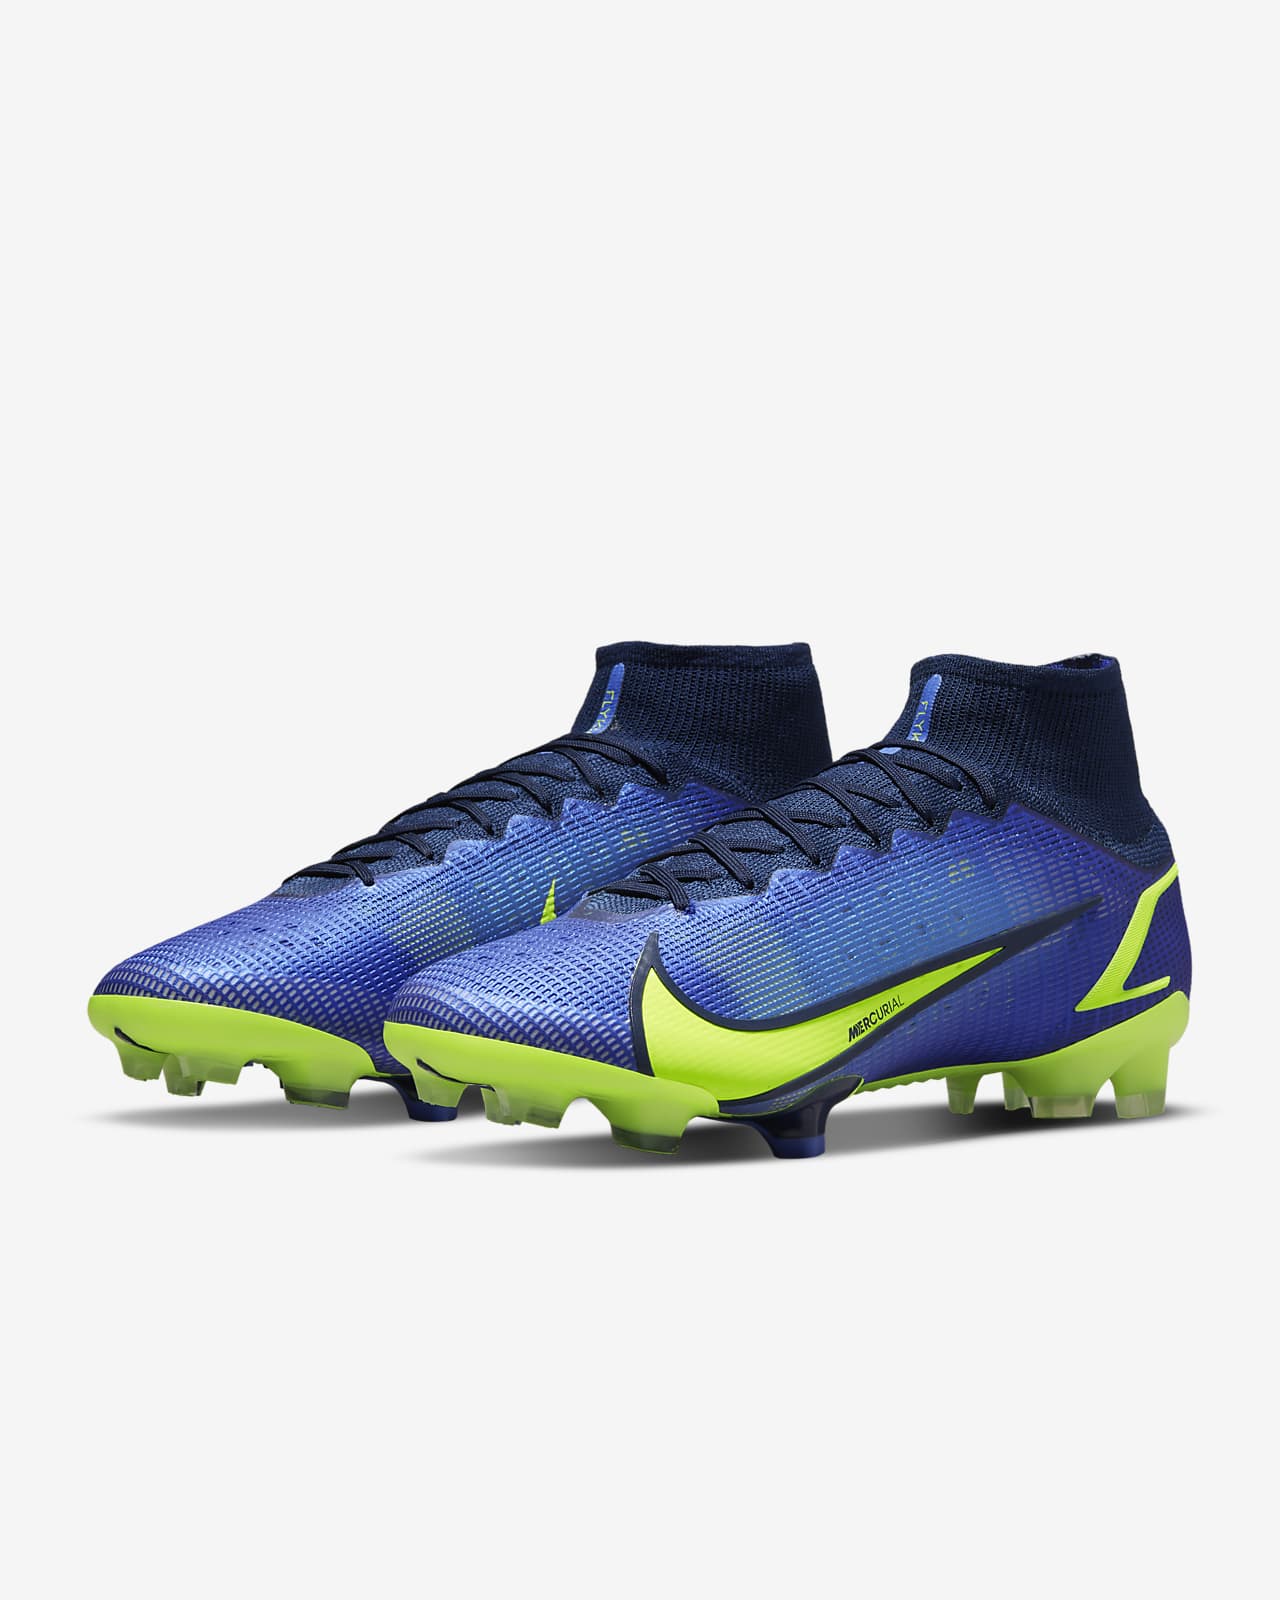 Nike Mercurial Superfly 8 Elite FG Firm-Ground Football Boots